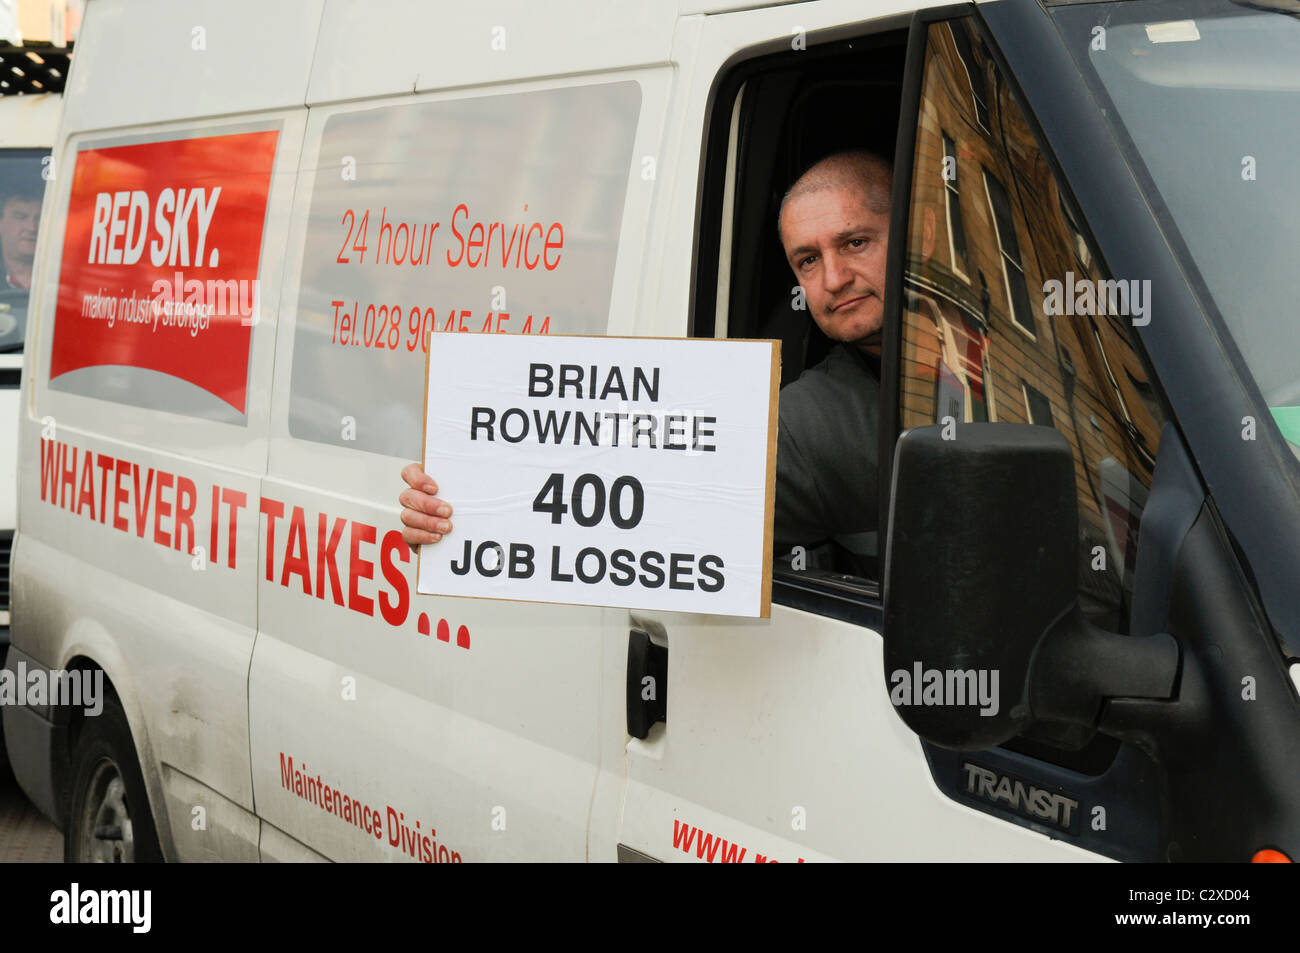 Belfast, Northern Ireland. 20 Apr 2011 - Employee from contracting firm Red Sky holds a protest banner saying 'Brian rowntree [NIHE Chairman] 400 Job Losses' while he drives past NIHE HQ over cancellation of their contract to maintain Housing executive stock Stock Photo